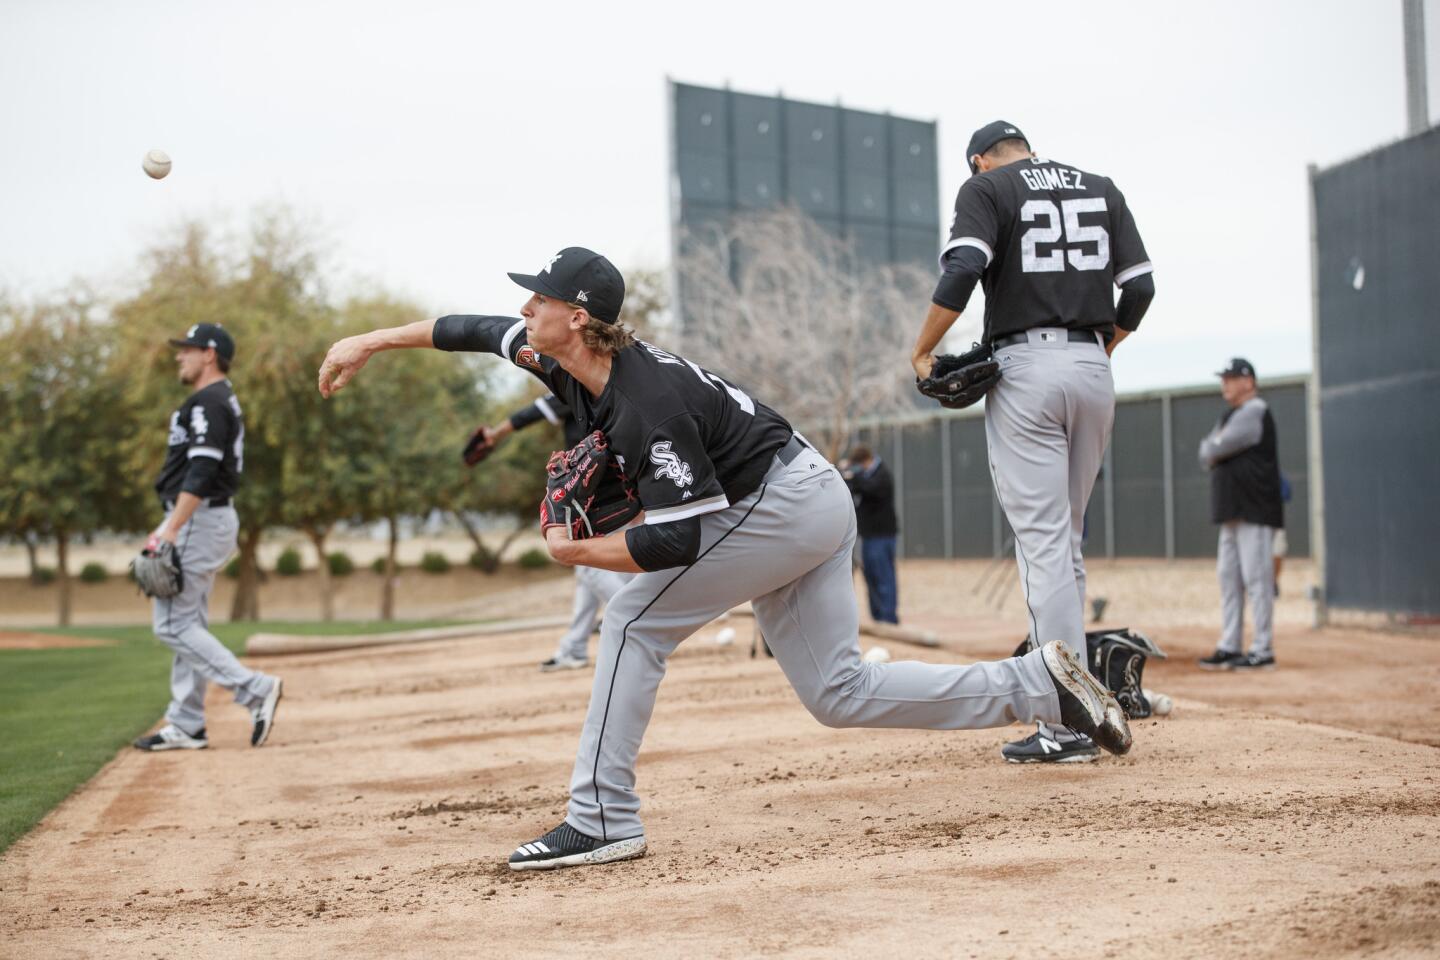 Michael Kopech pitches in the bullpen during White Sox spring training at Camelback Ranch Friday Feb. 16, 2018, in Glendale, Ariz.